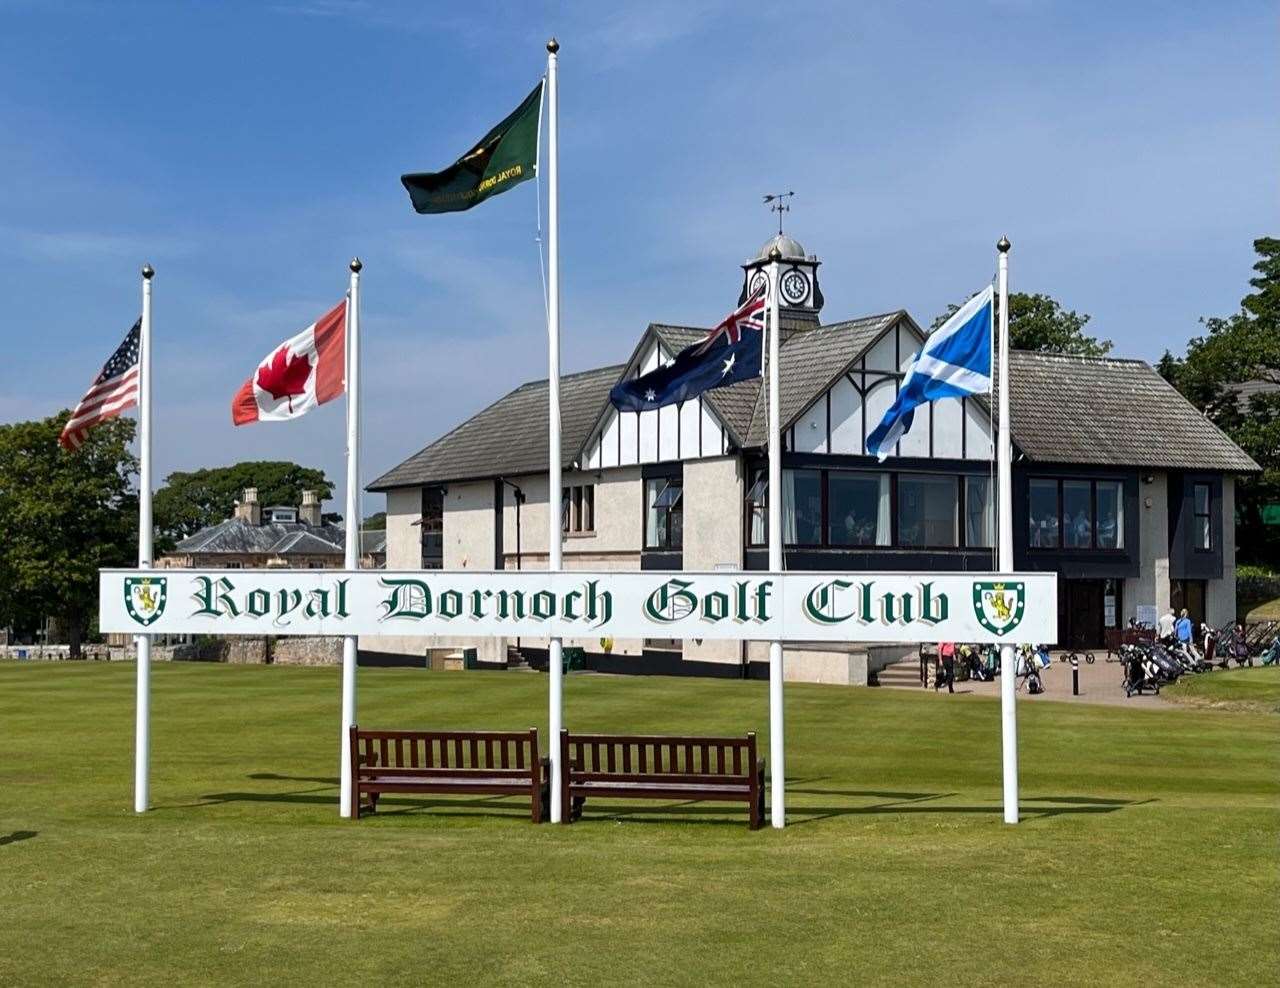 Members have backed plans for the new £13.9 million clubhouse at Royal Dornoch. Photo: Bannerman Media